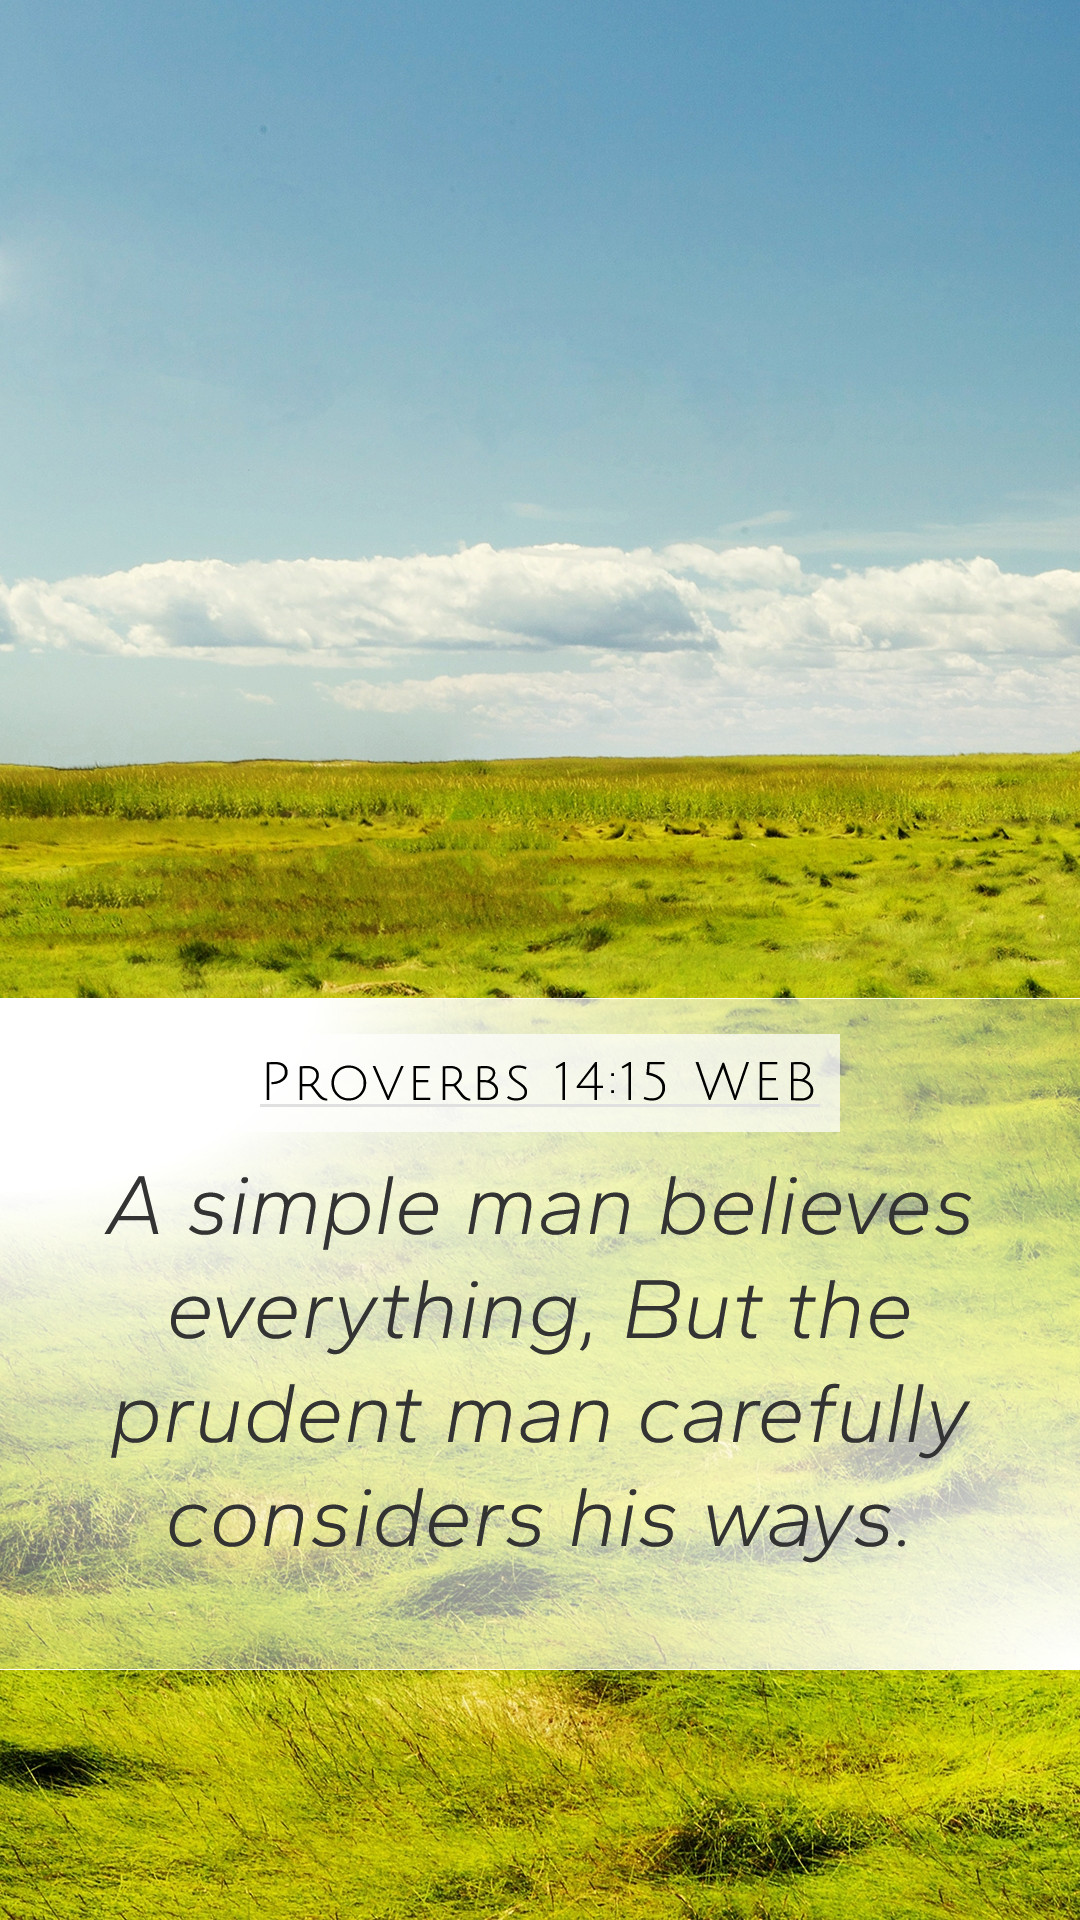 Proverbs 1415 WEB Mobile Phone Wallpaper   A simple man believes